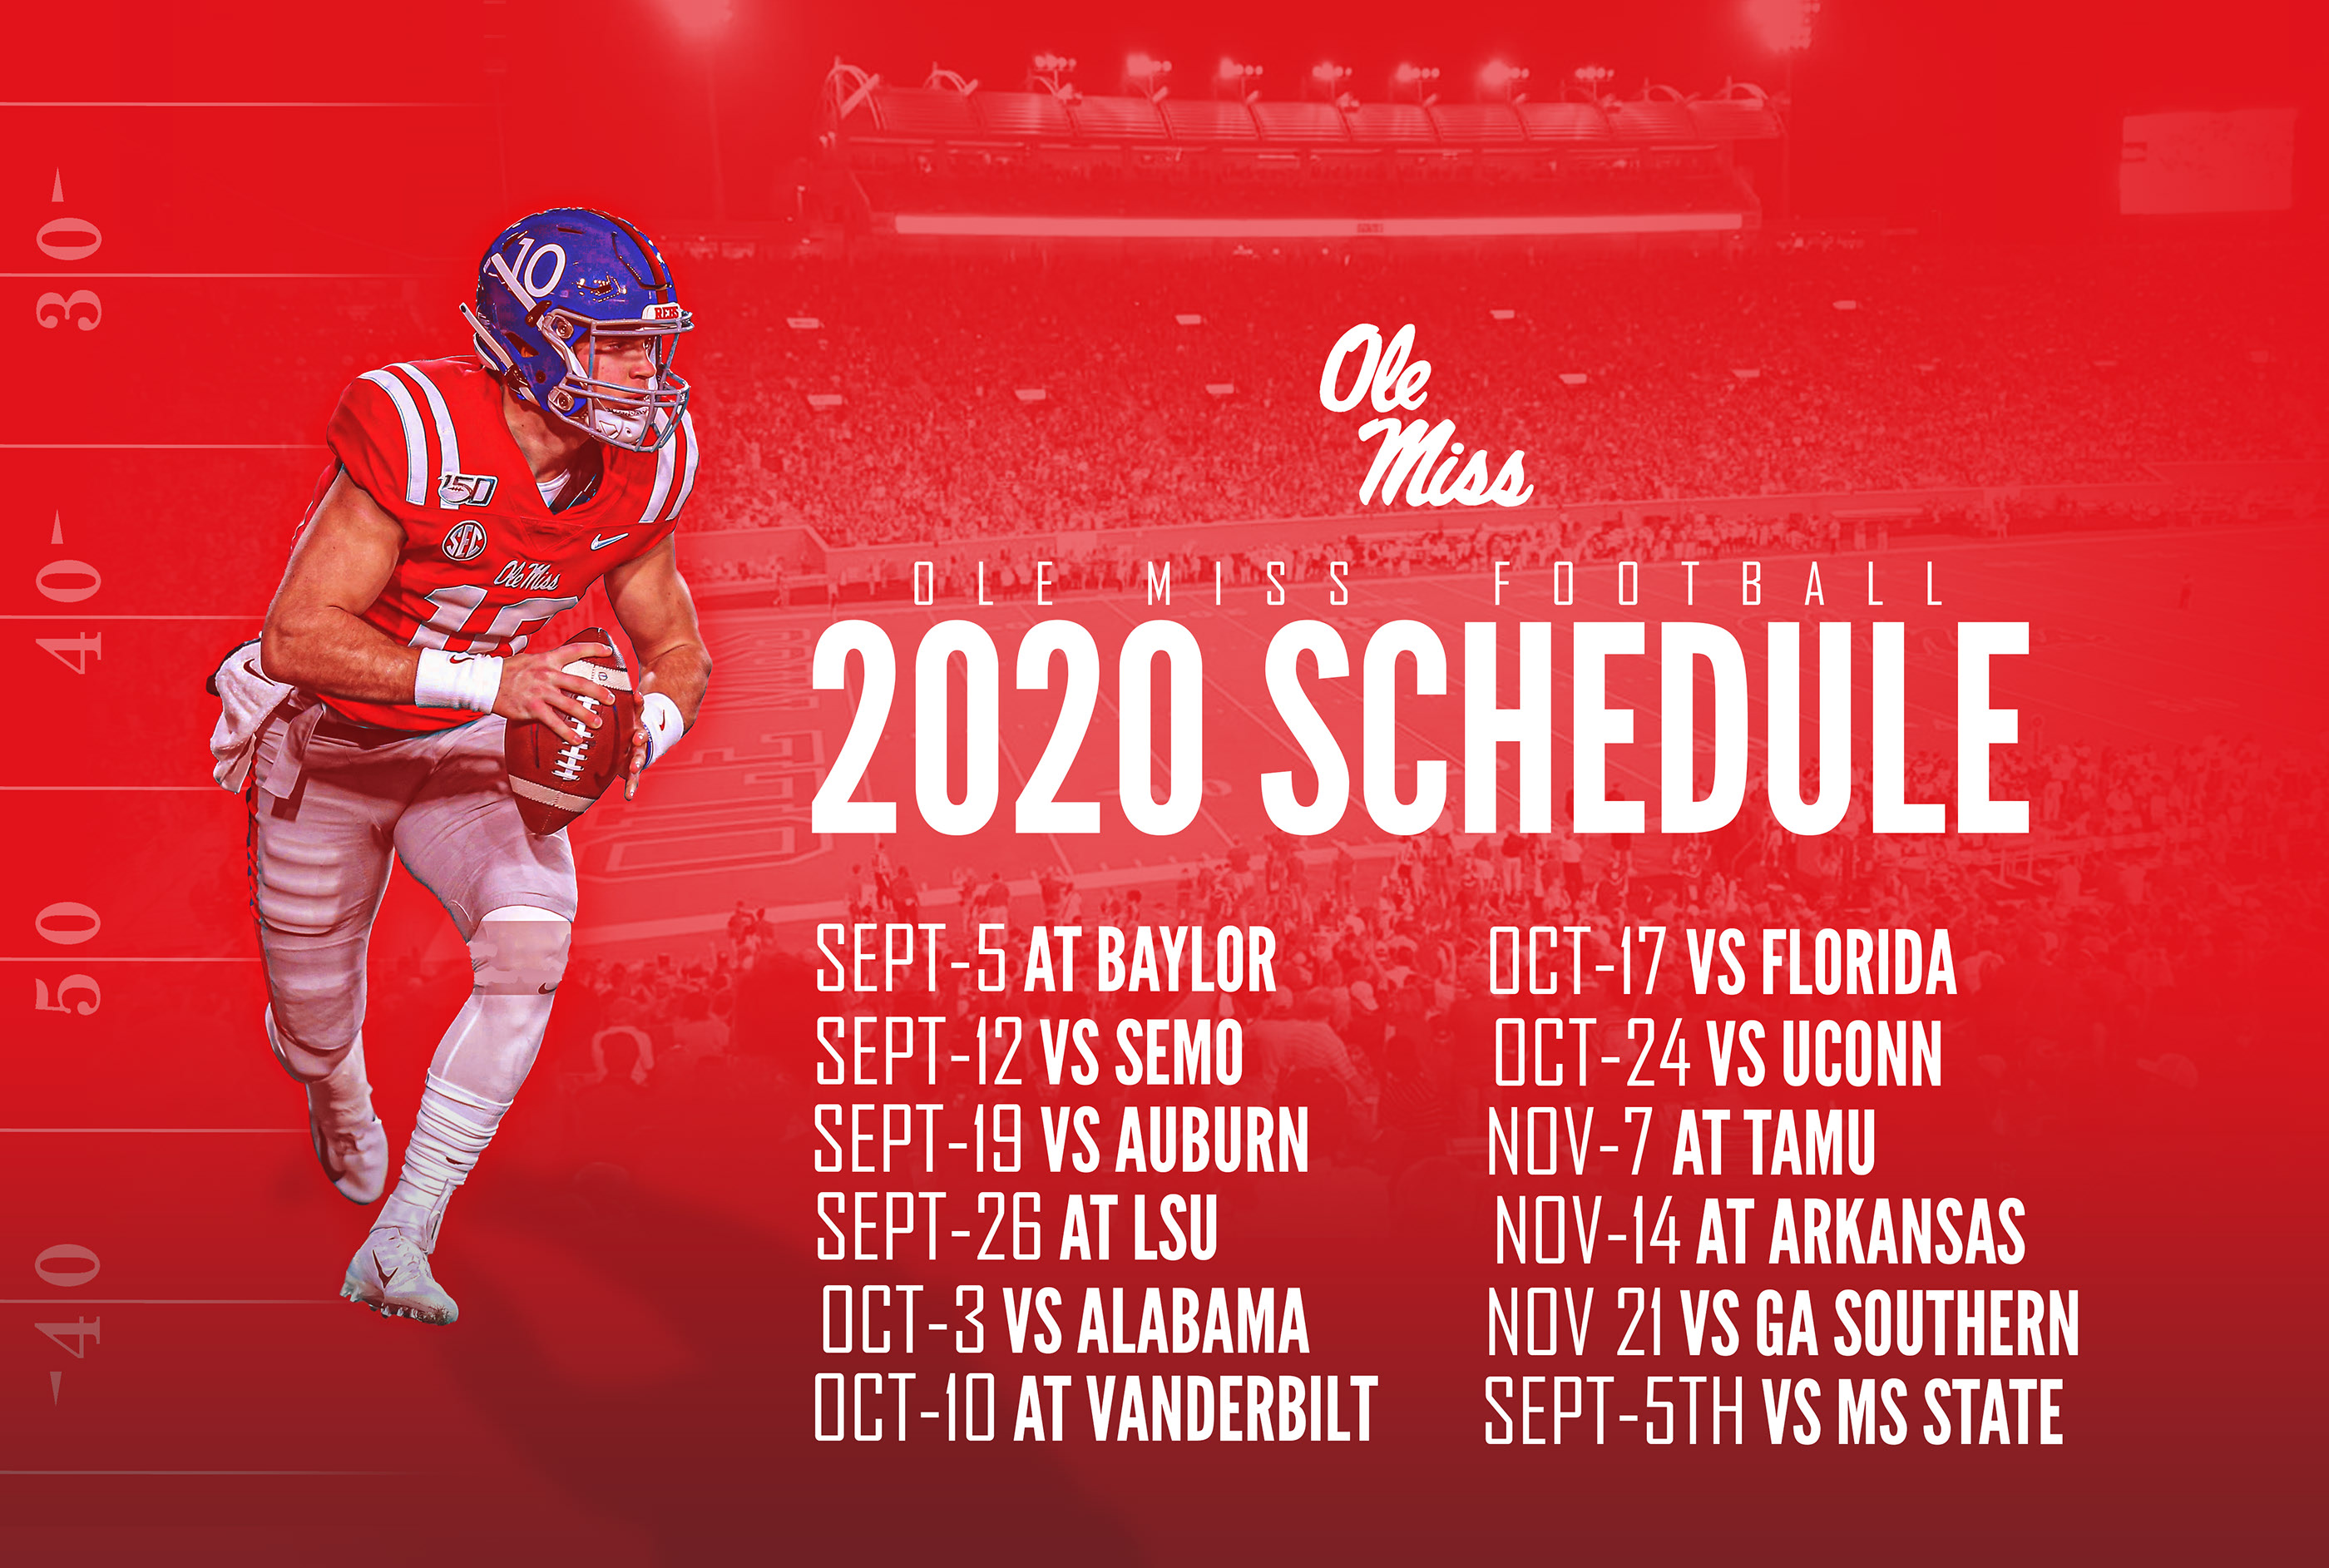 Mississippi Football Schedule 2022 Ole Miss Football Schedule 2020 On Behance